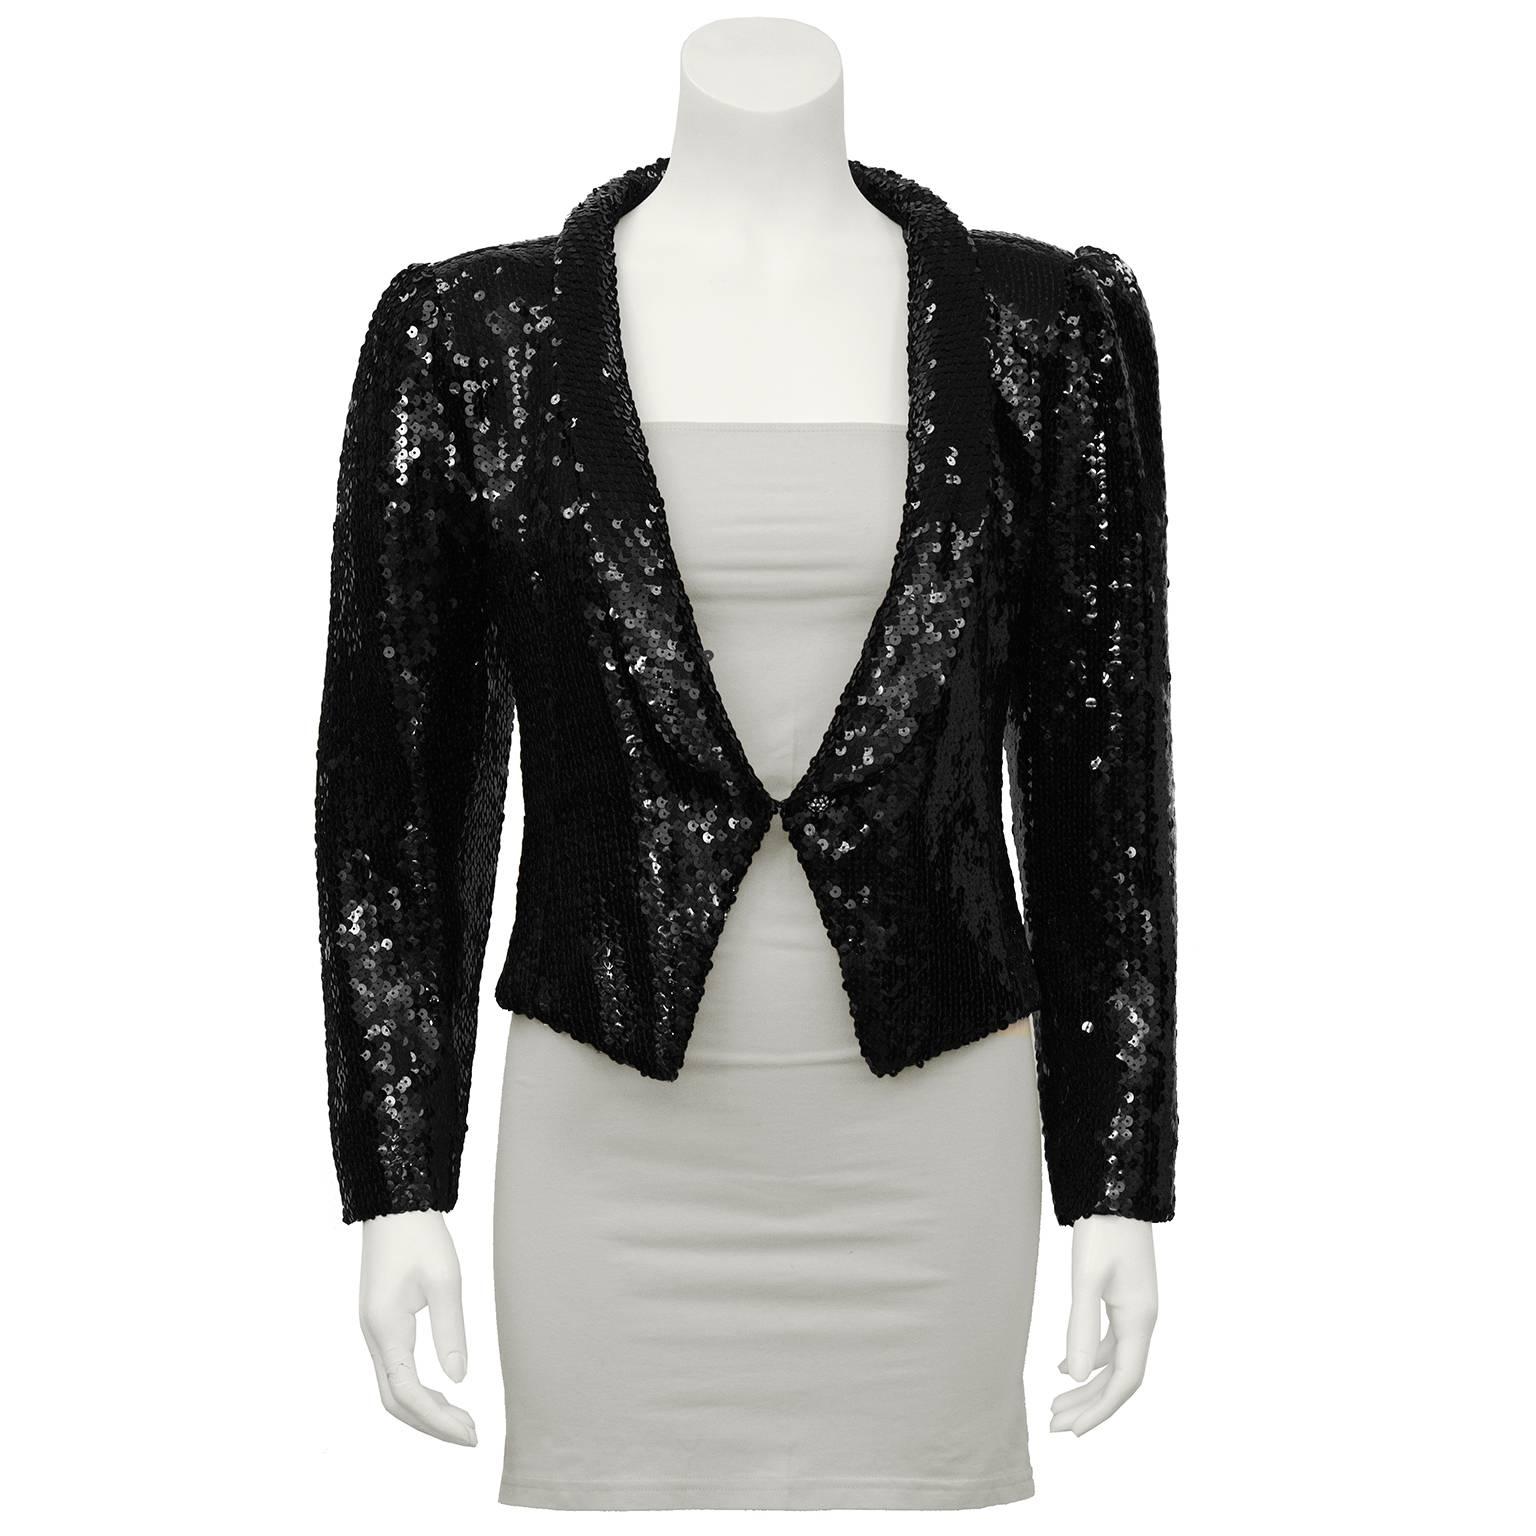 1980's Ungaro fully sequined black cropped jacket. Perfect timeless piece to throw on over a LBD or your favorite jeans and white T-shirt. Slight gather to the shoulder adds a touch of femininity with a narrow shawl collar and a single center hook